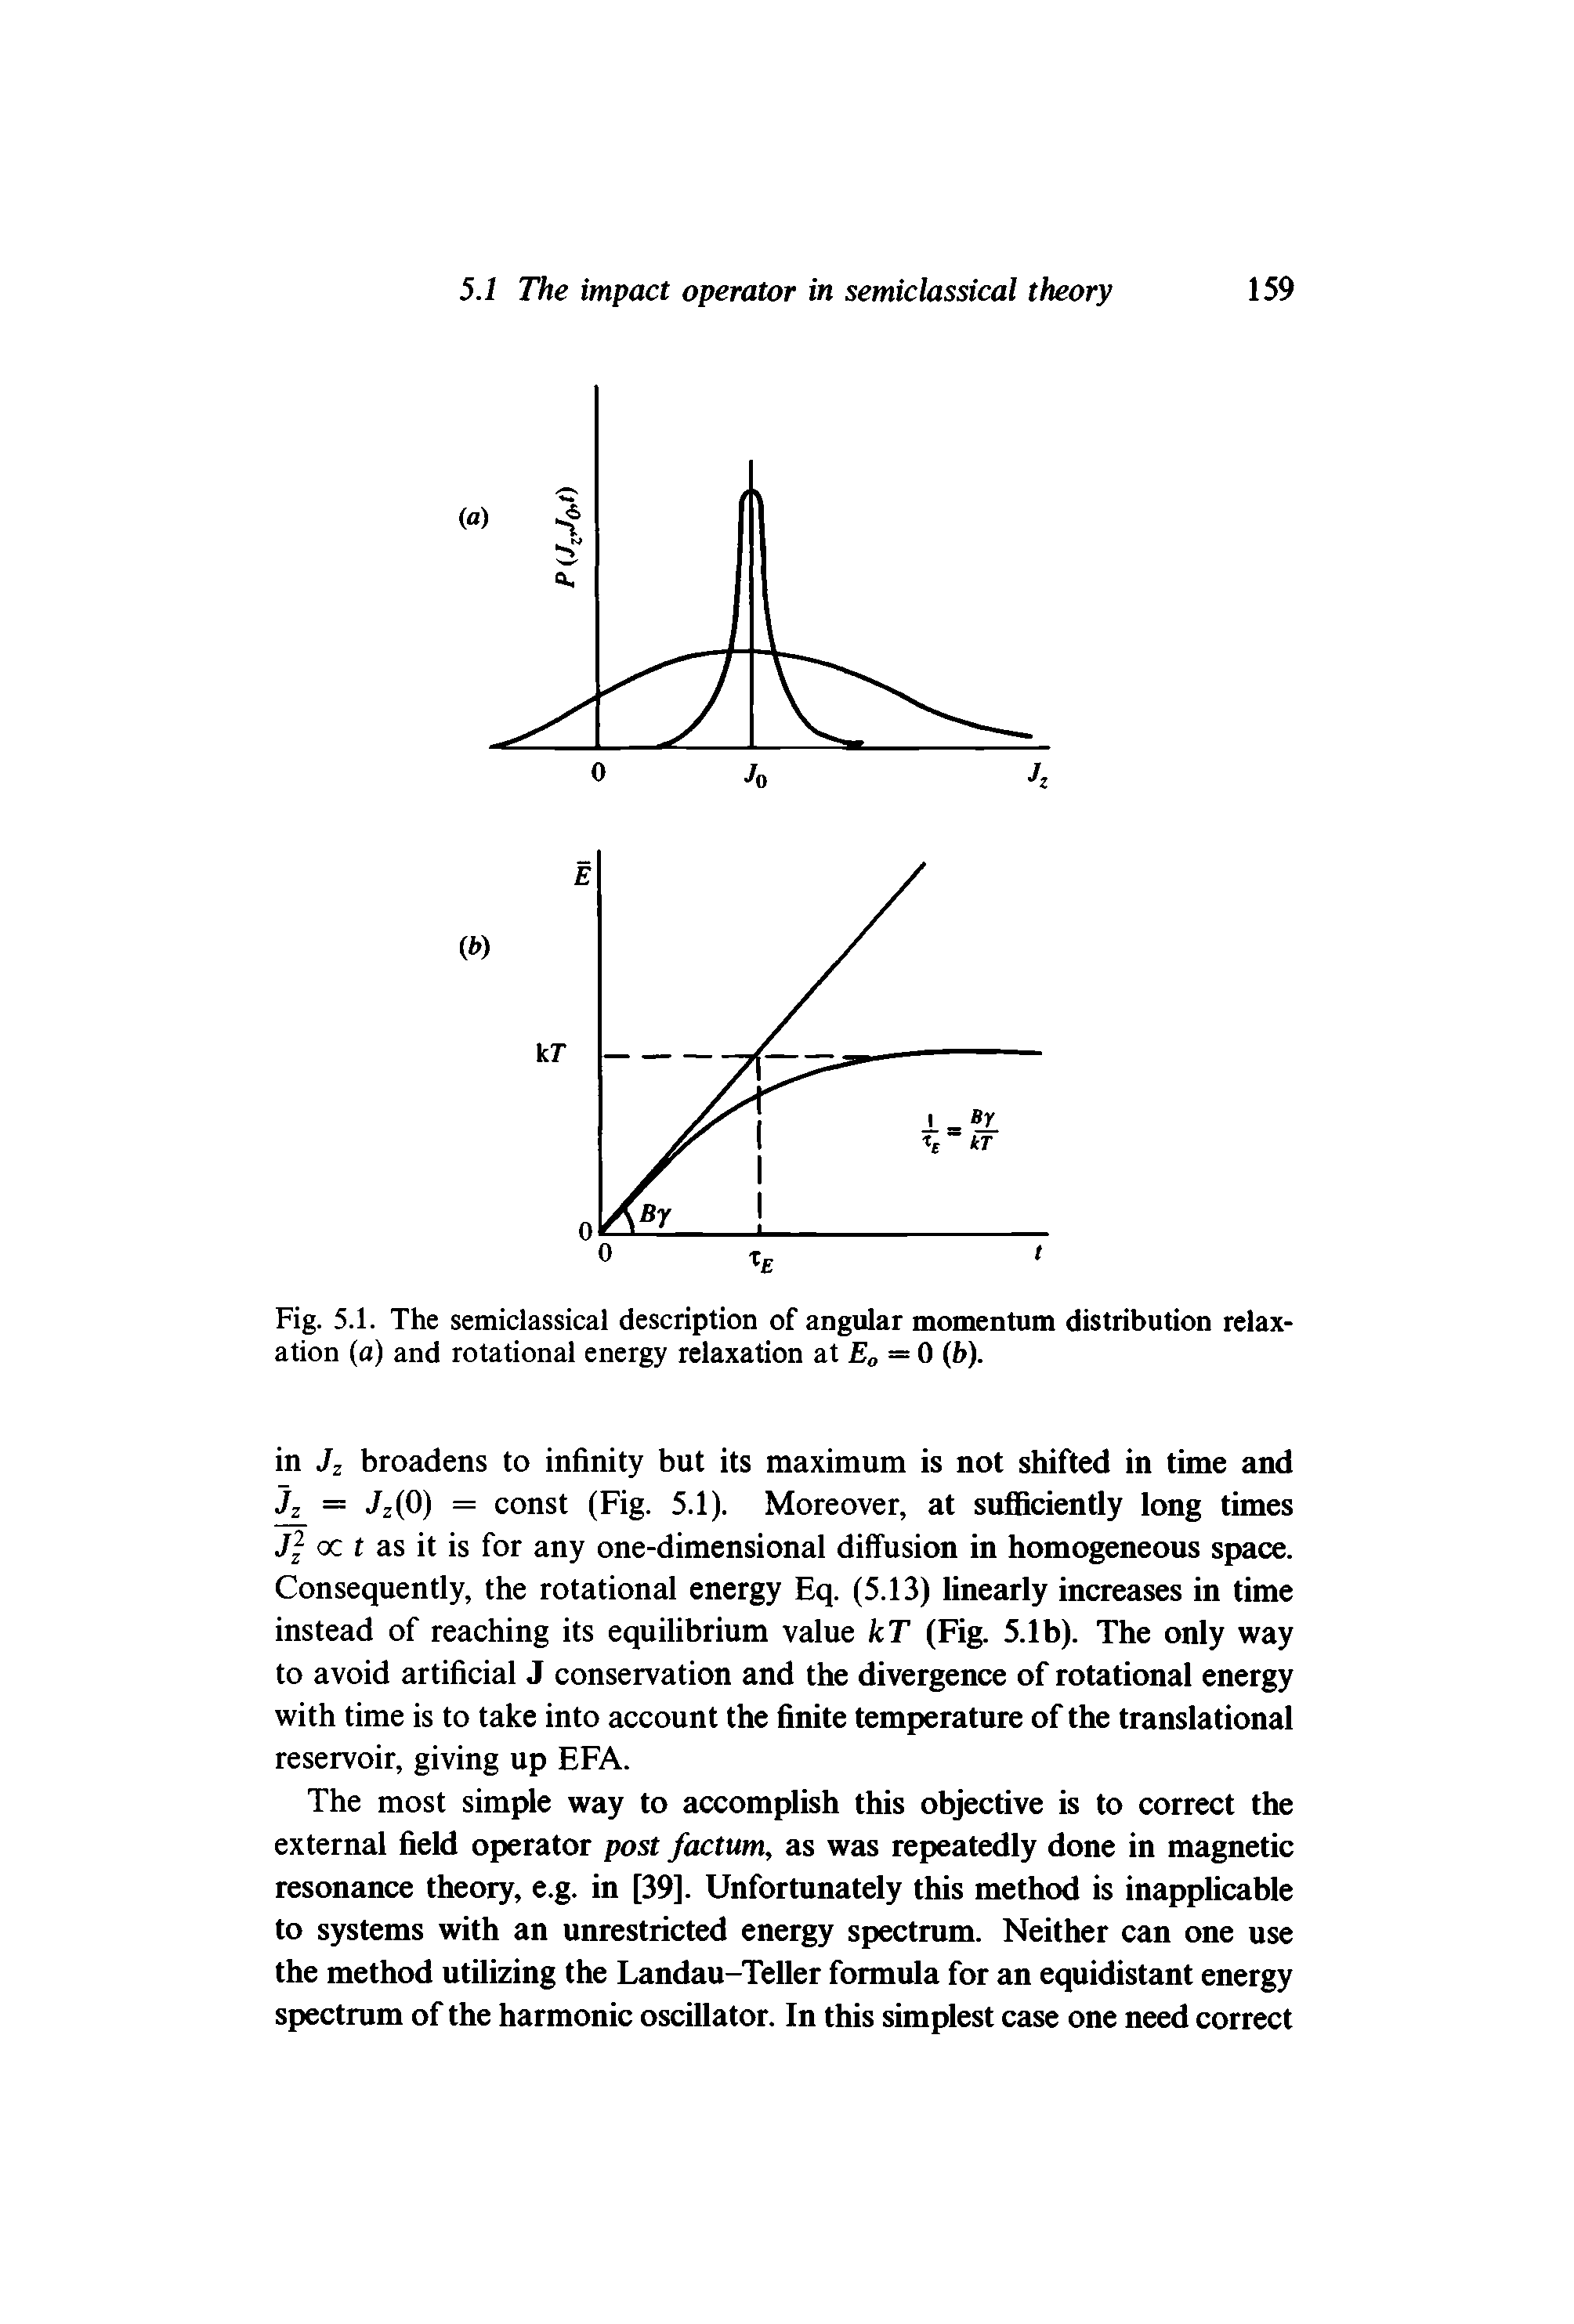 Fig. 5.1. The semiclassical description of angular momentum distribution relaxation (a) and rotational energy relaxation at Ea — 0 (6).